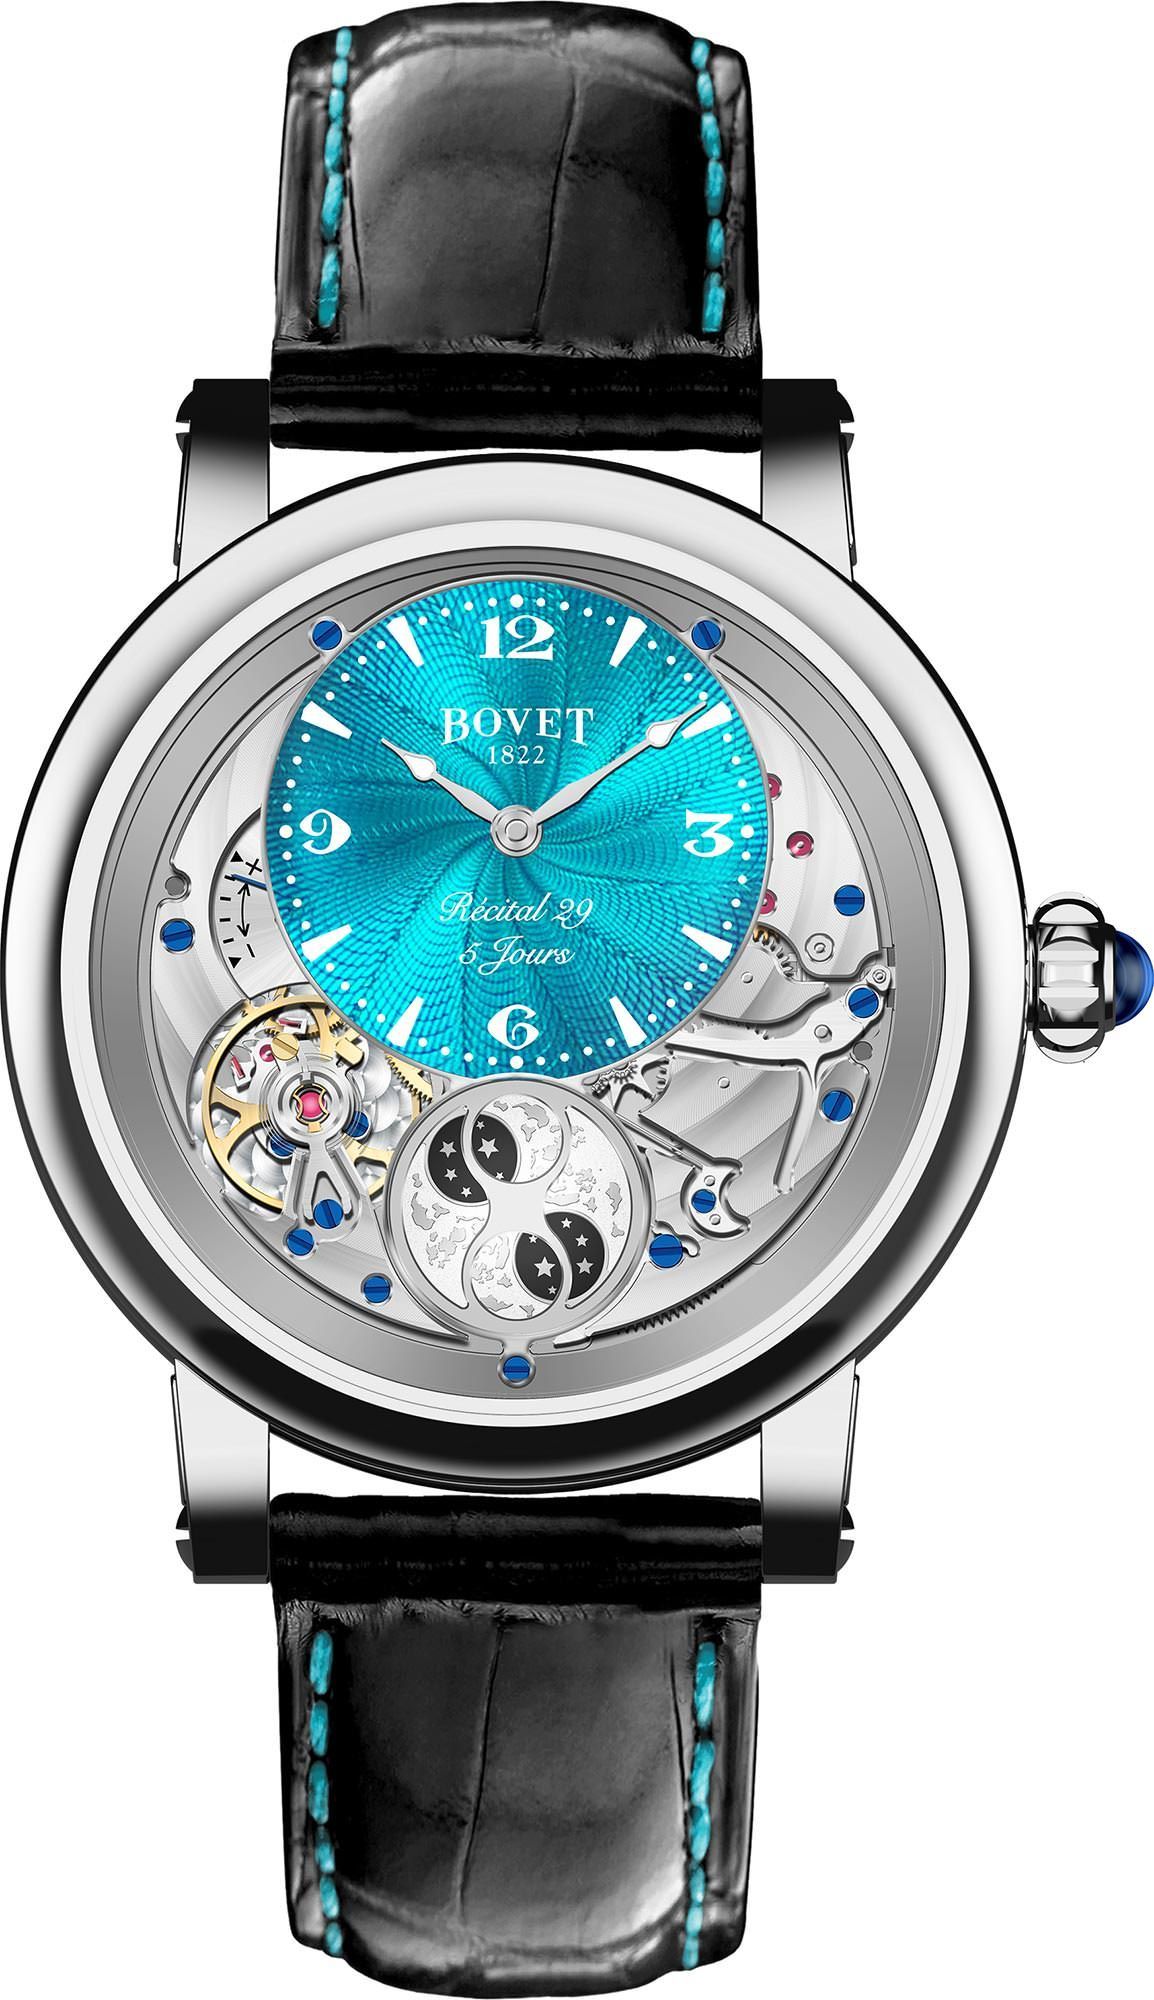 Bovet Dimier Récital 29 Turquoise Dial 42 mm Manual Winding Watch For Men - 1